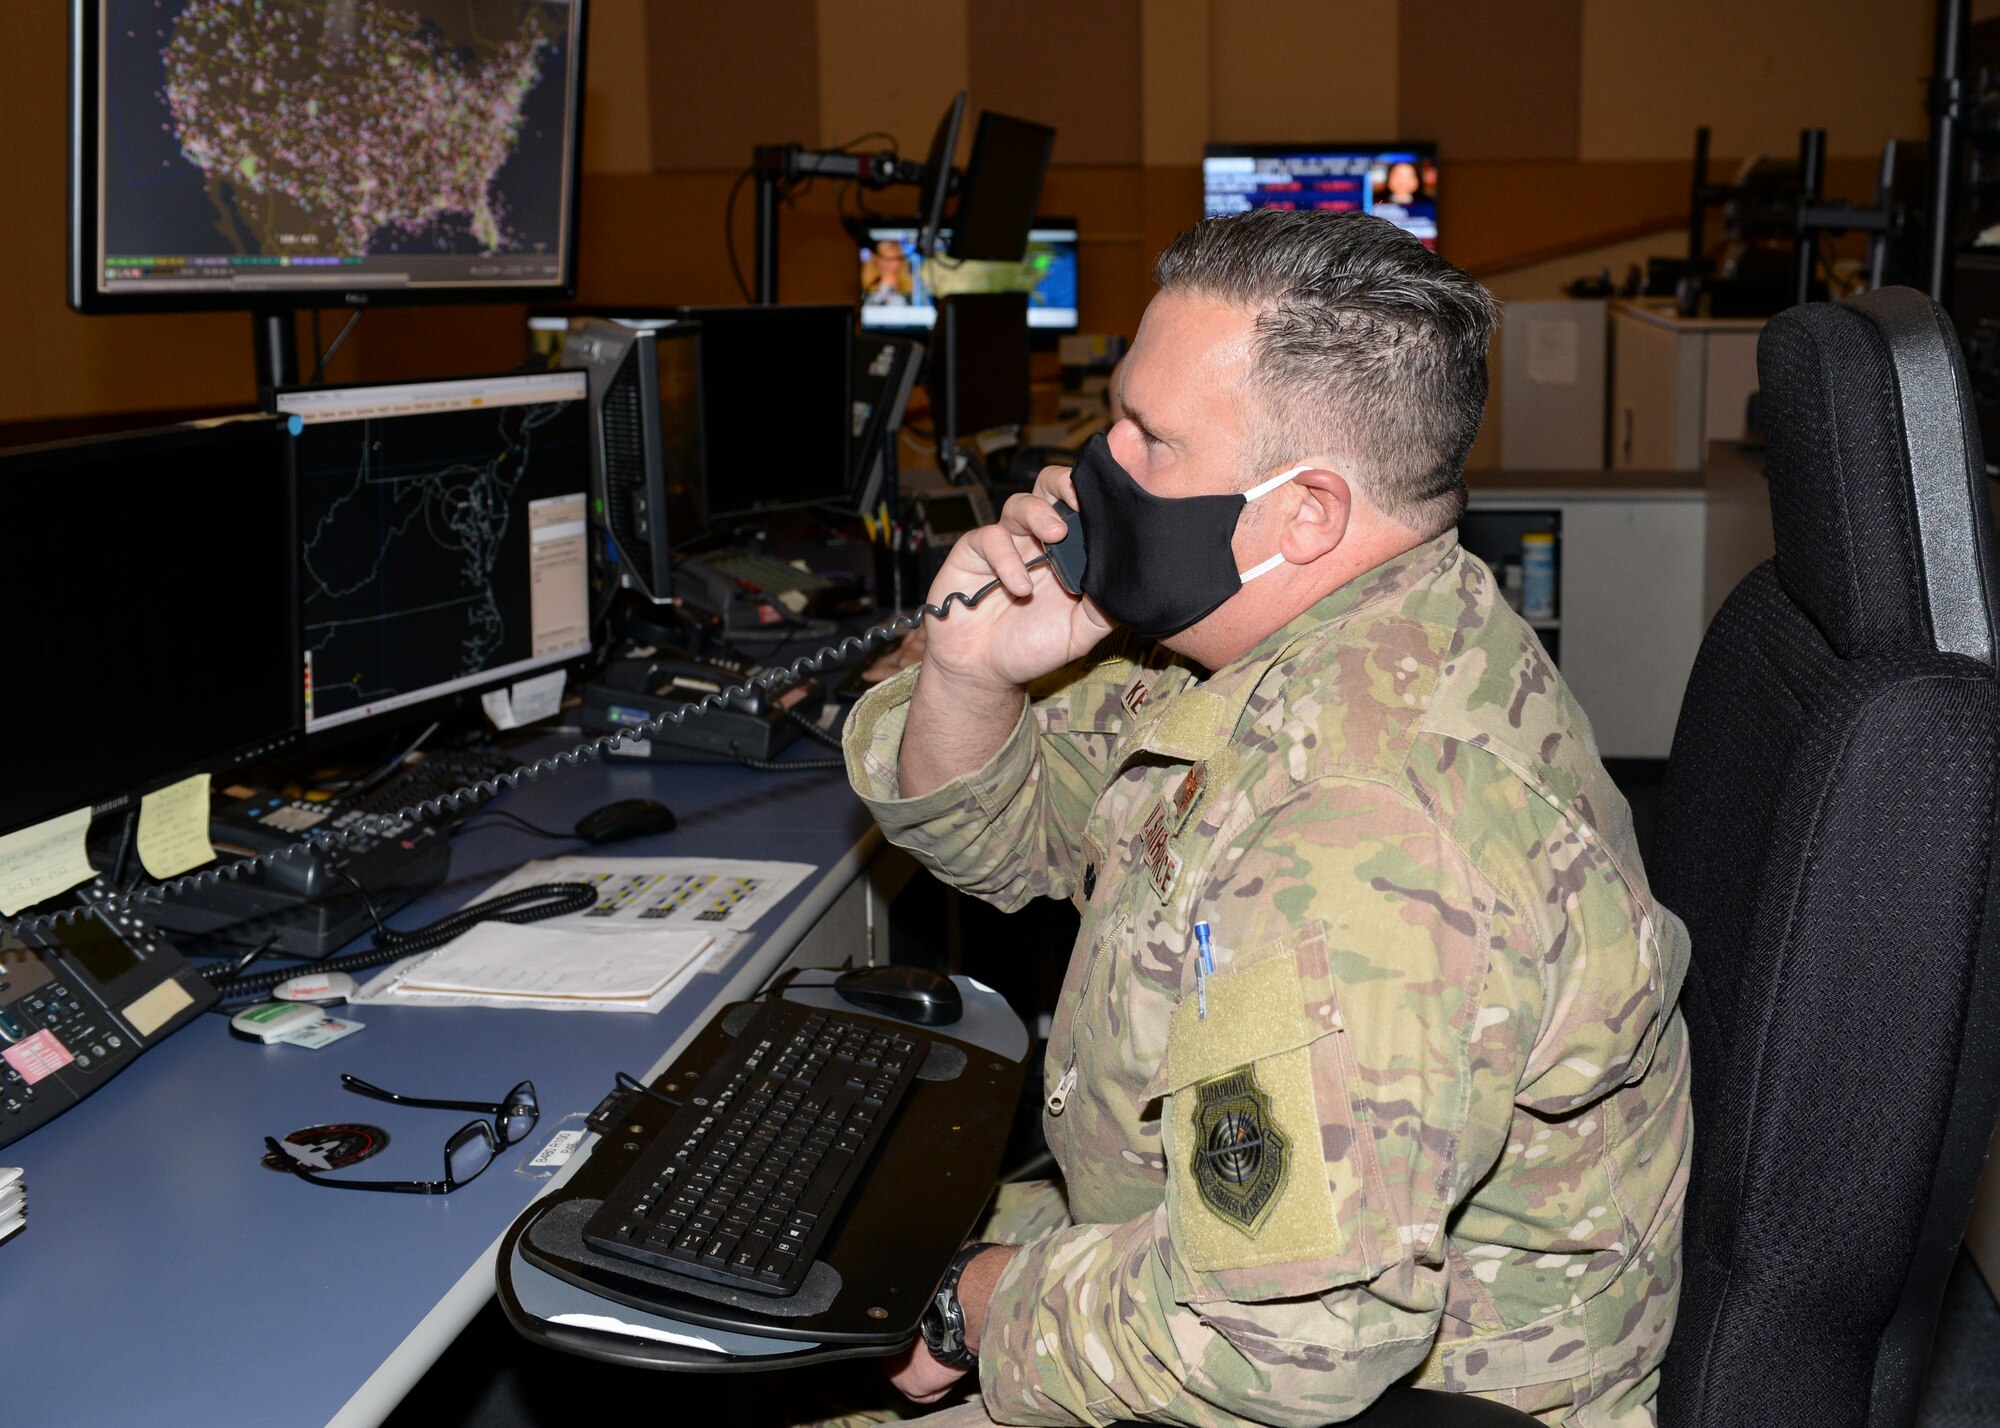 U.S. Air Force Lt. Col. G. Scott Key, senior offensive duty officer, 601st Air Operations Center (AOC), talks on the phone while practicing personal safety protocols due to the current COVID-19 global pandemic at Tyndall Air Force Base, Florida, May 4, 2020.